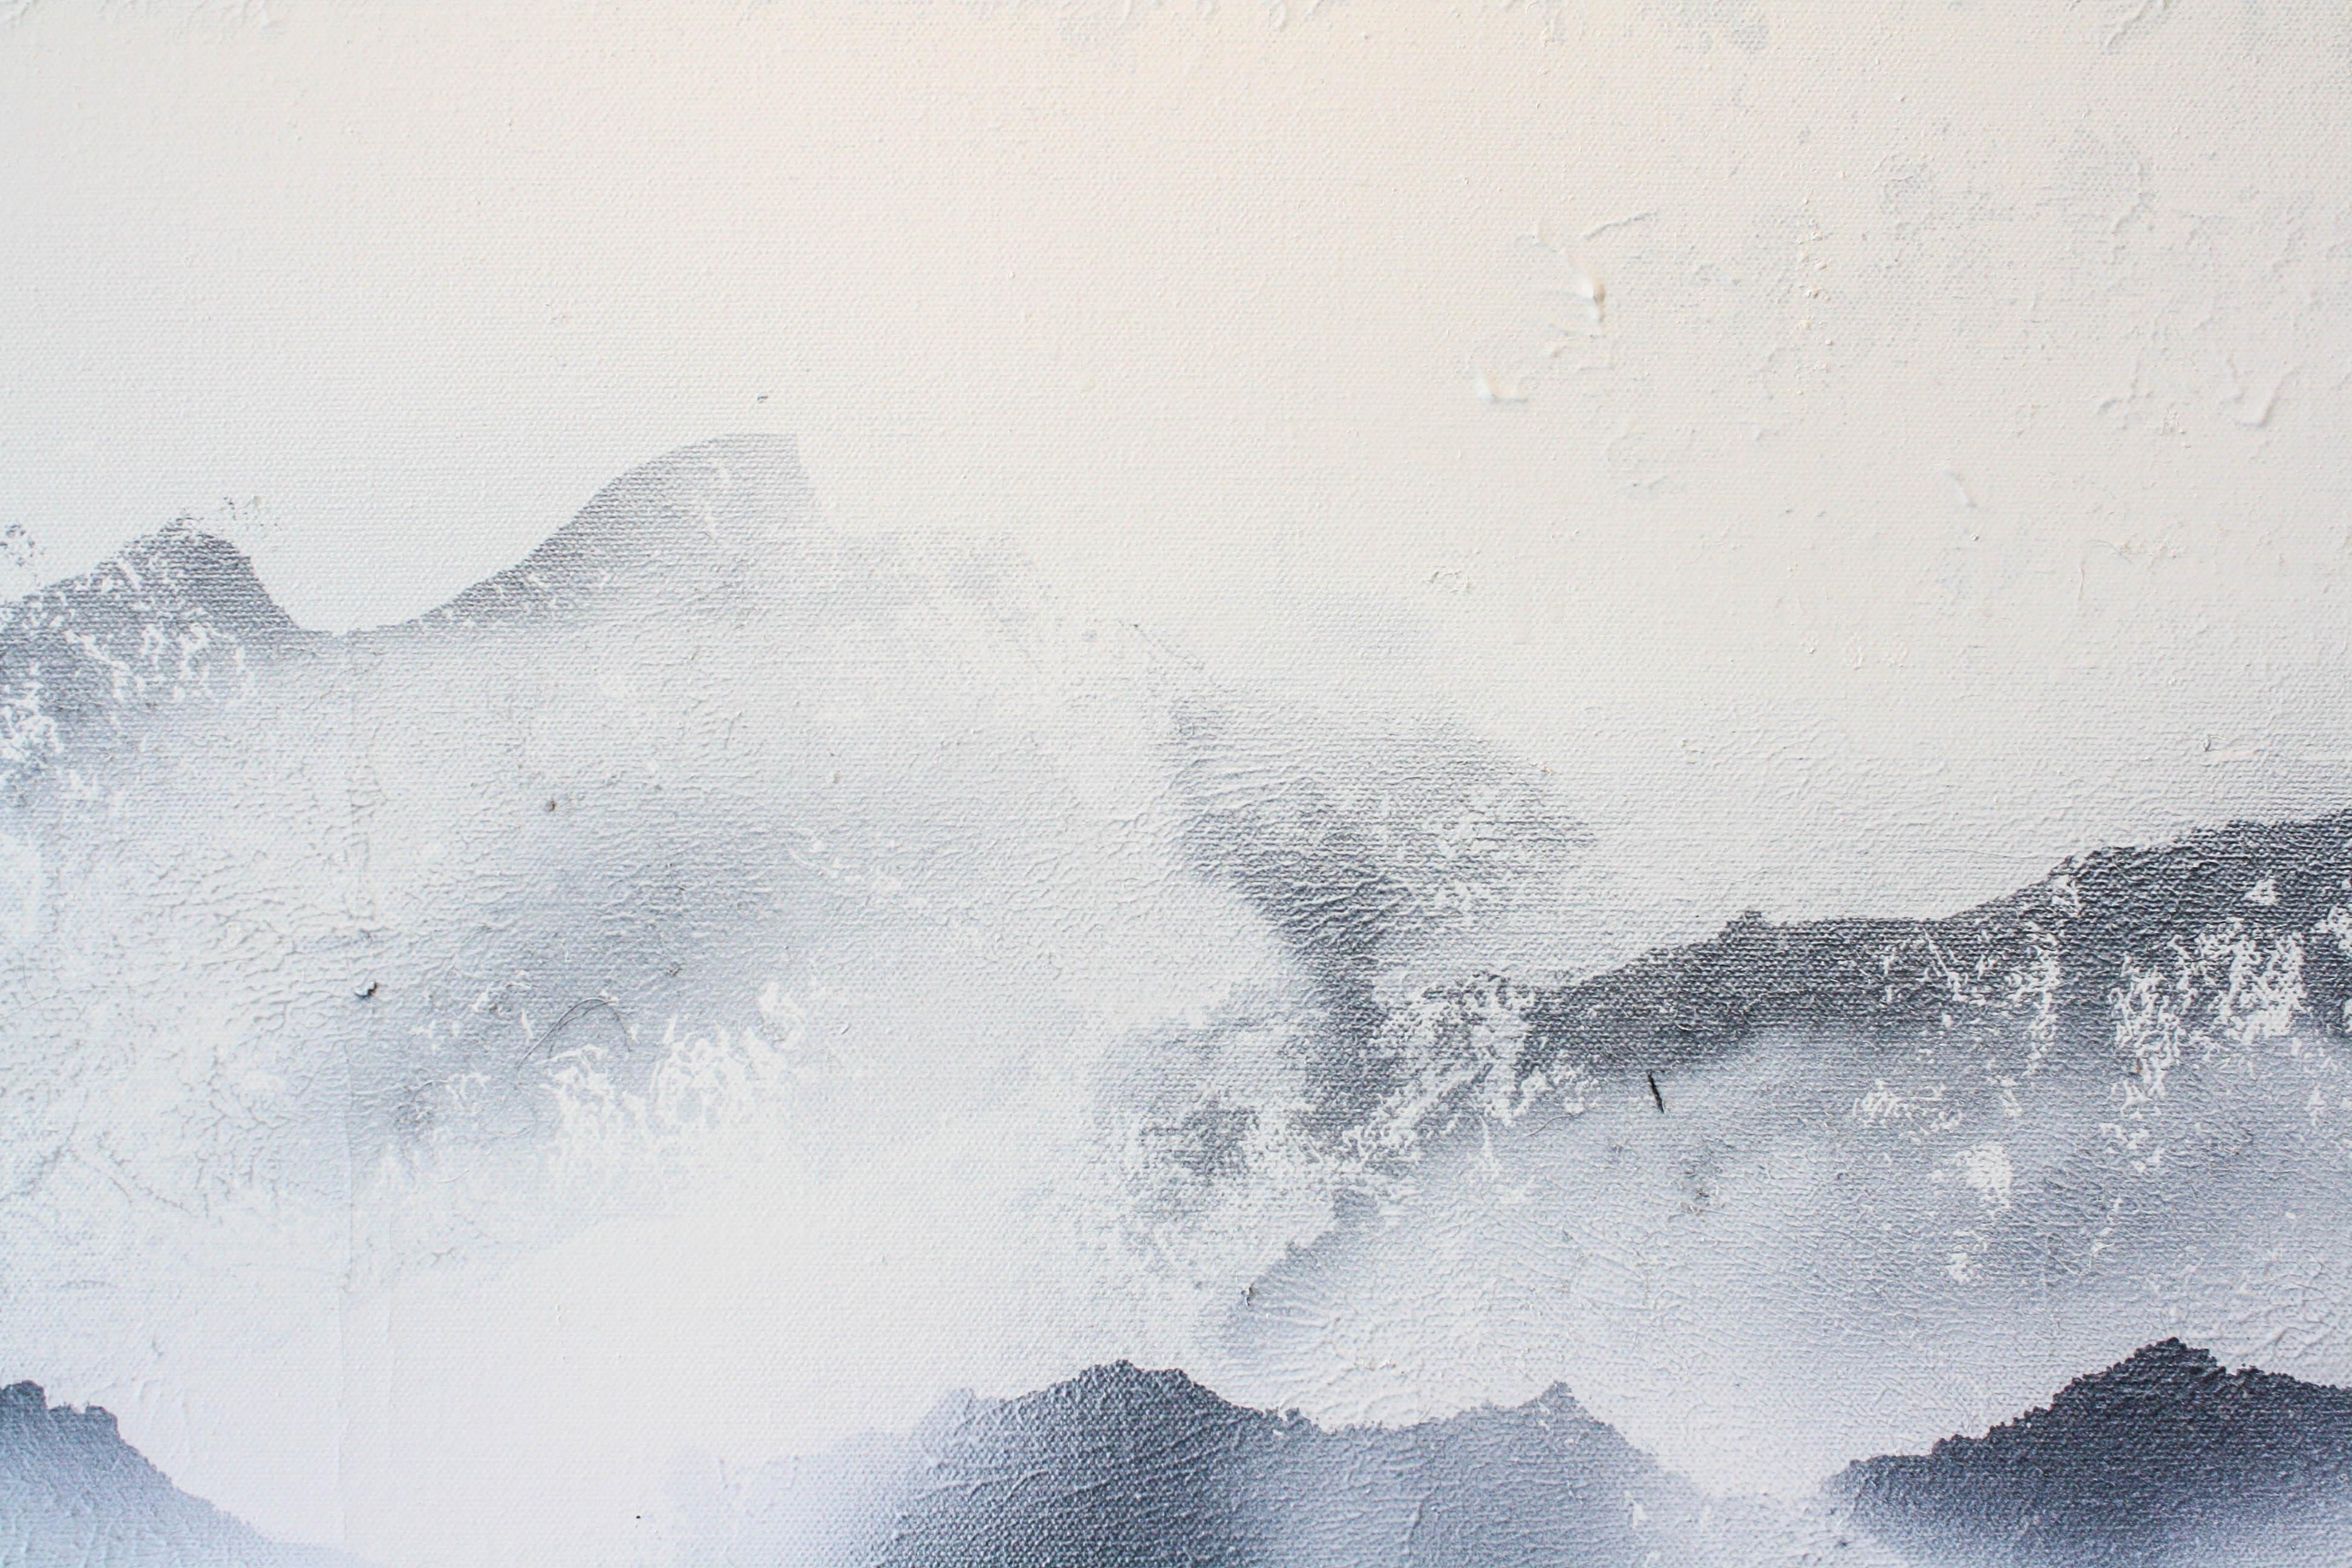 Painting of misty mountain peaks with texture and white contrast.

Daniel Holland (b. 1984, South Carolina, United States) attended Watkins College of Art and Design. He has shown in multiple exhibitions around Tennessee, such as OZ Arts Nashville